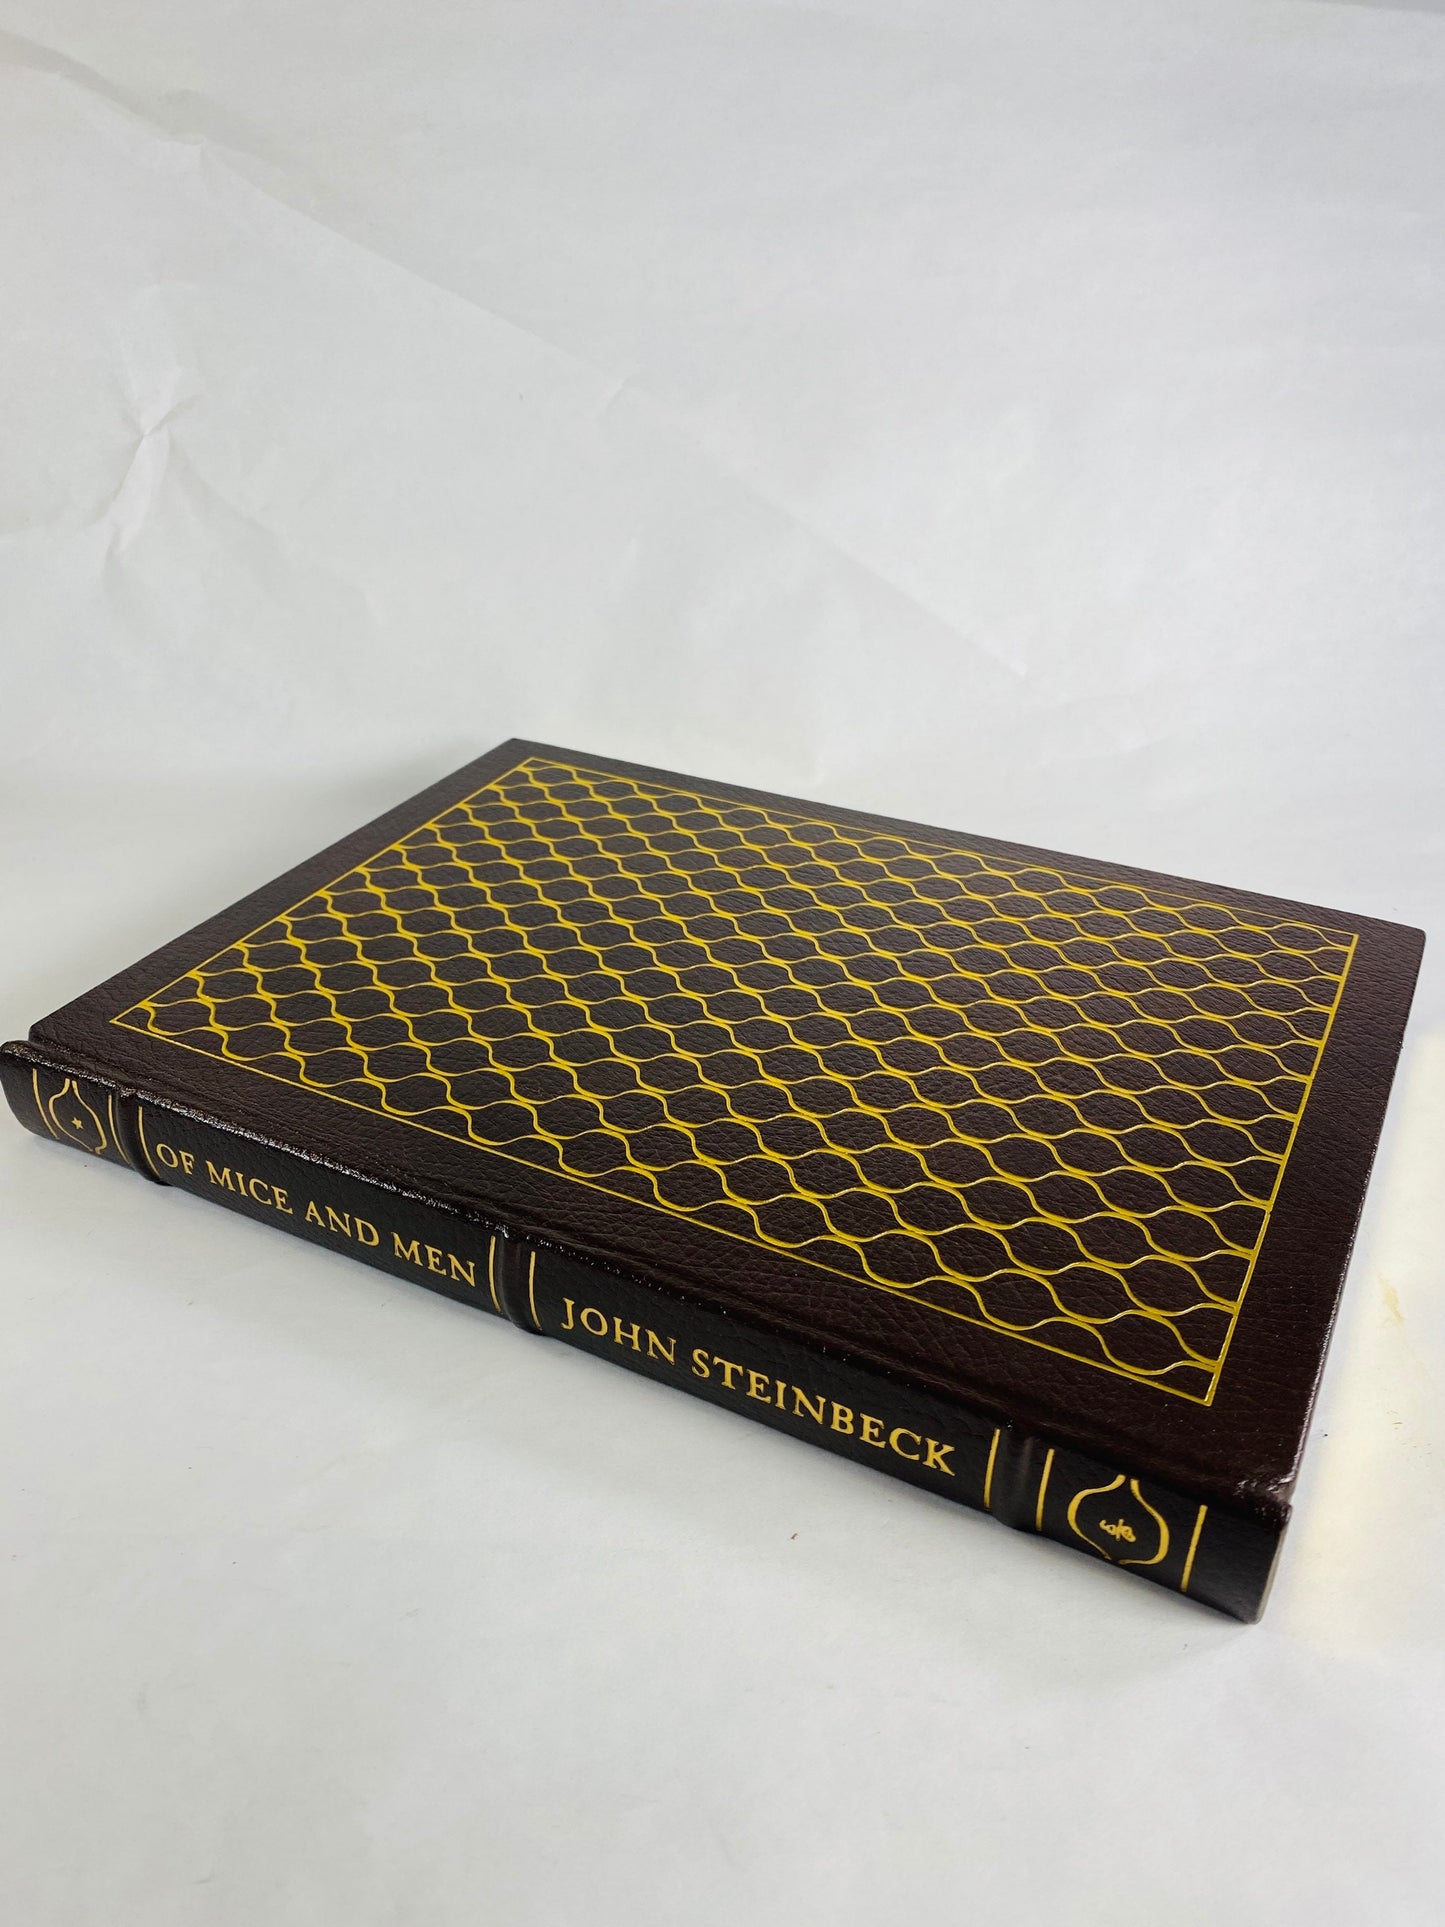 Of Mice and Men John Steinbeck BEAUTIFUL vintage leather bound Easton Press book circa 1977 Pulitzer Prize black & gold home decor